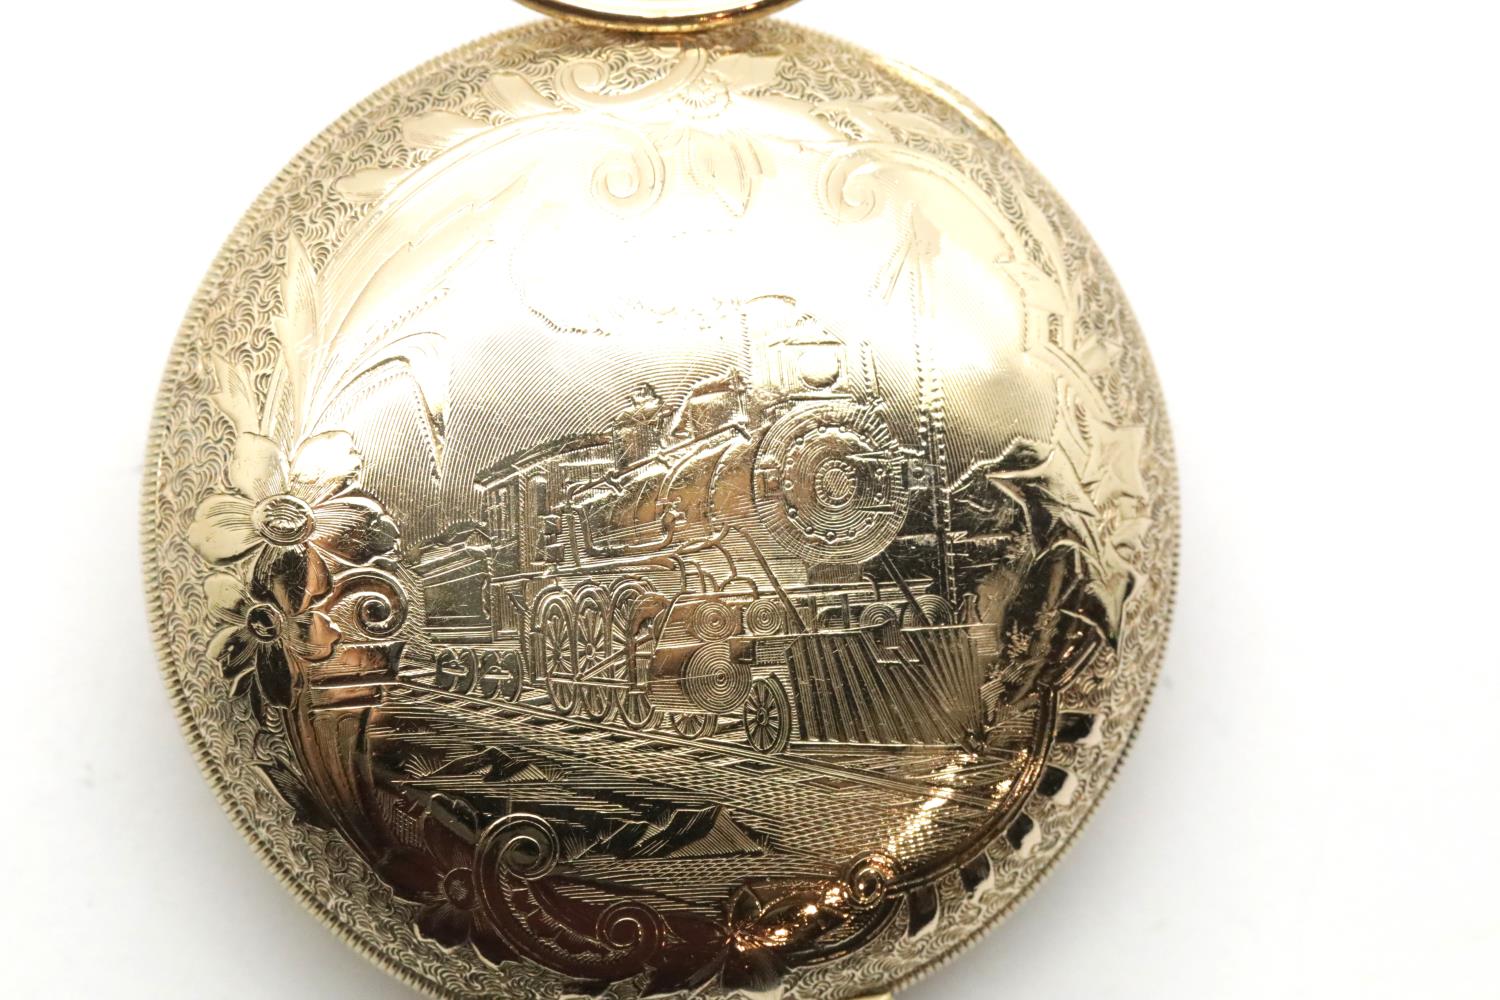 Waltham gold plated lever set railroad full hunter pocket watch, case D: 54 mm, working at - Image 5 of 5